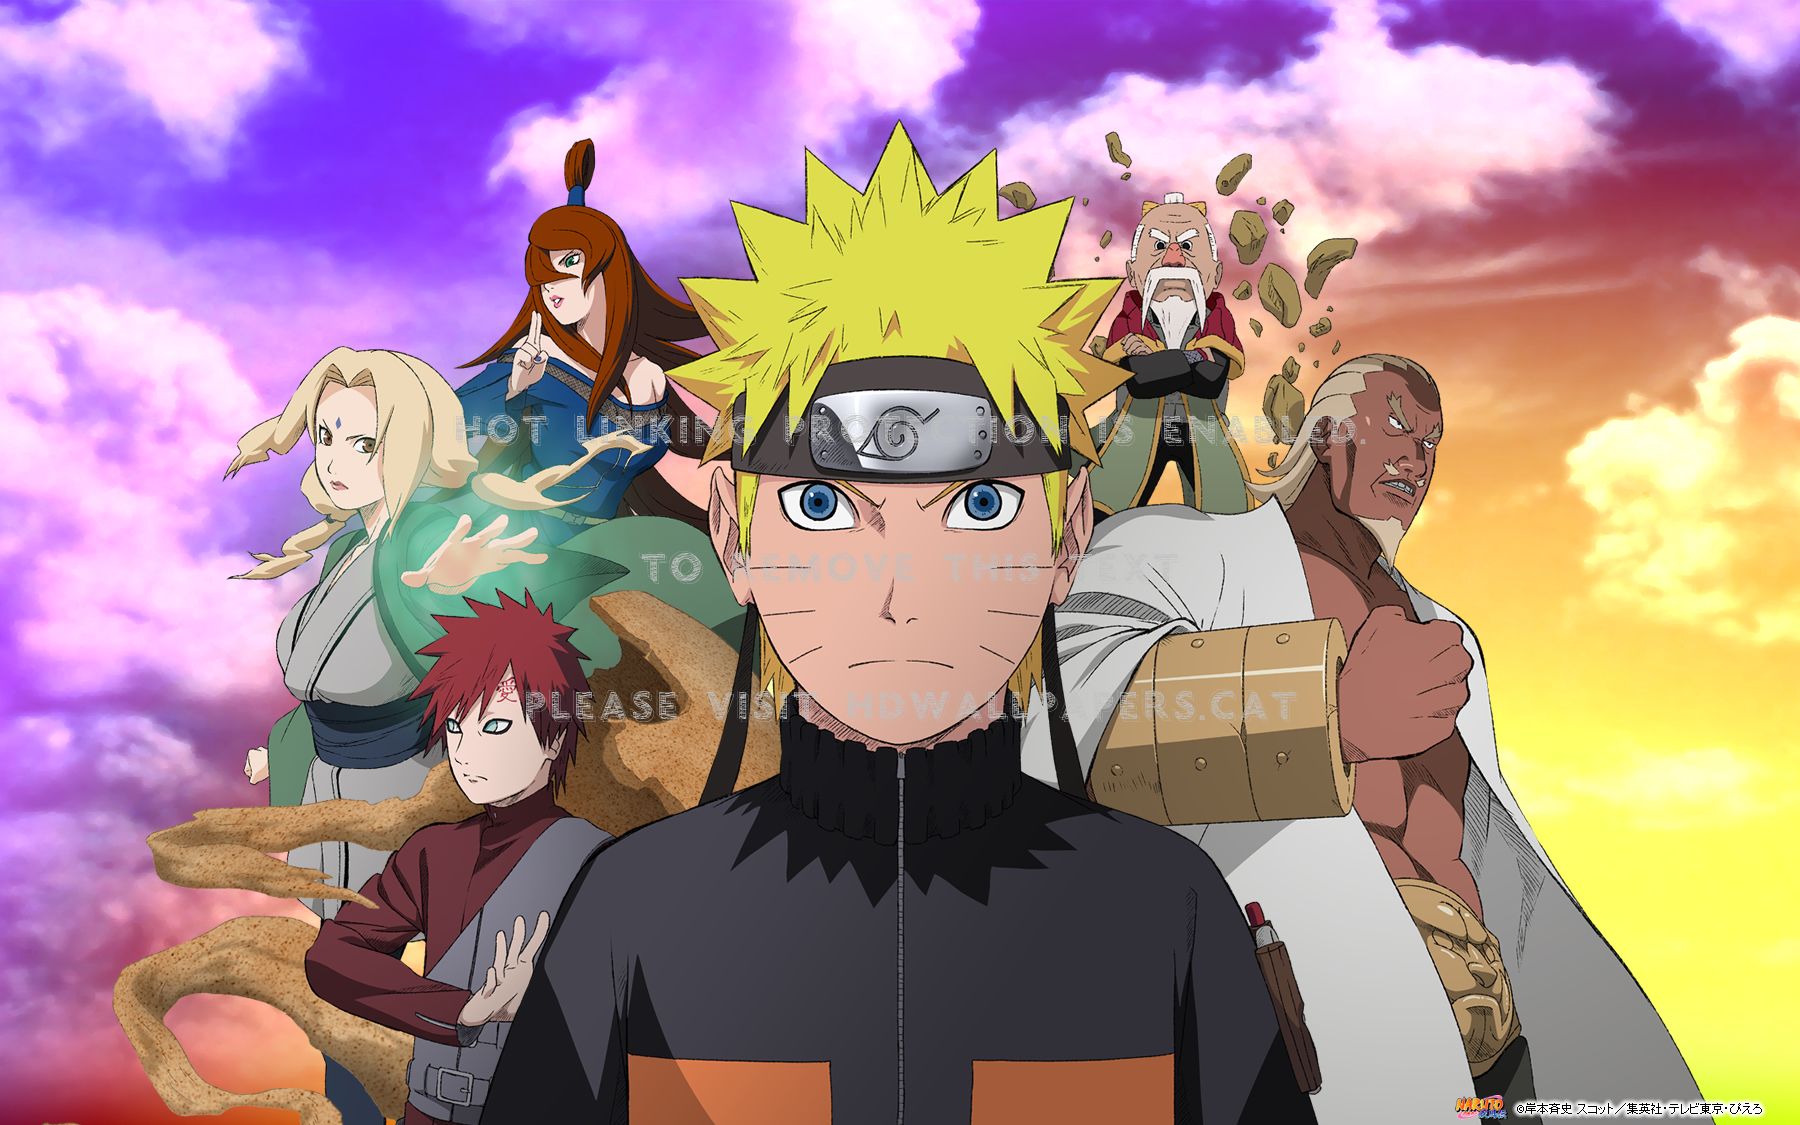 naruto & the allied kages tsunade shippuden